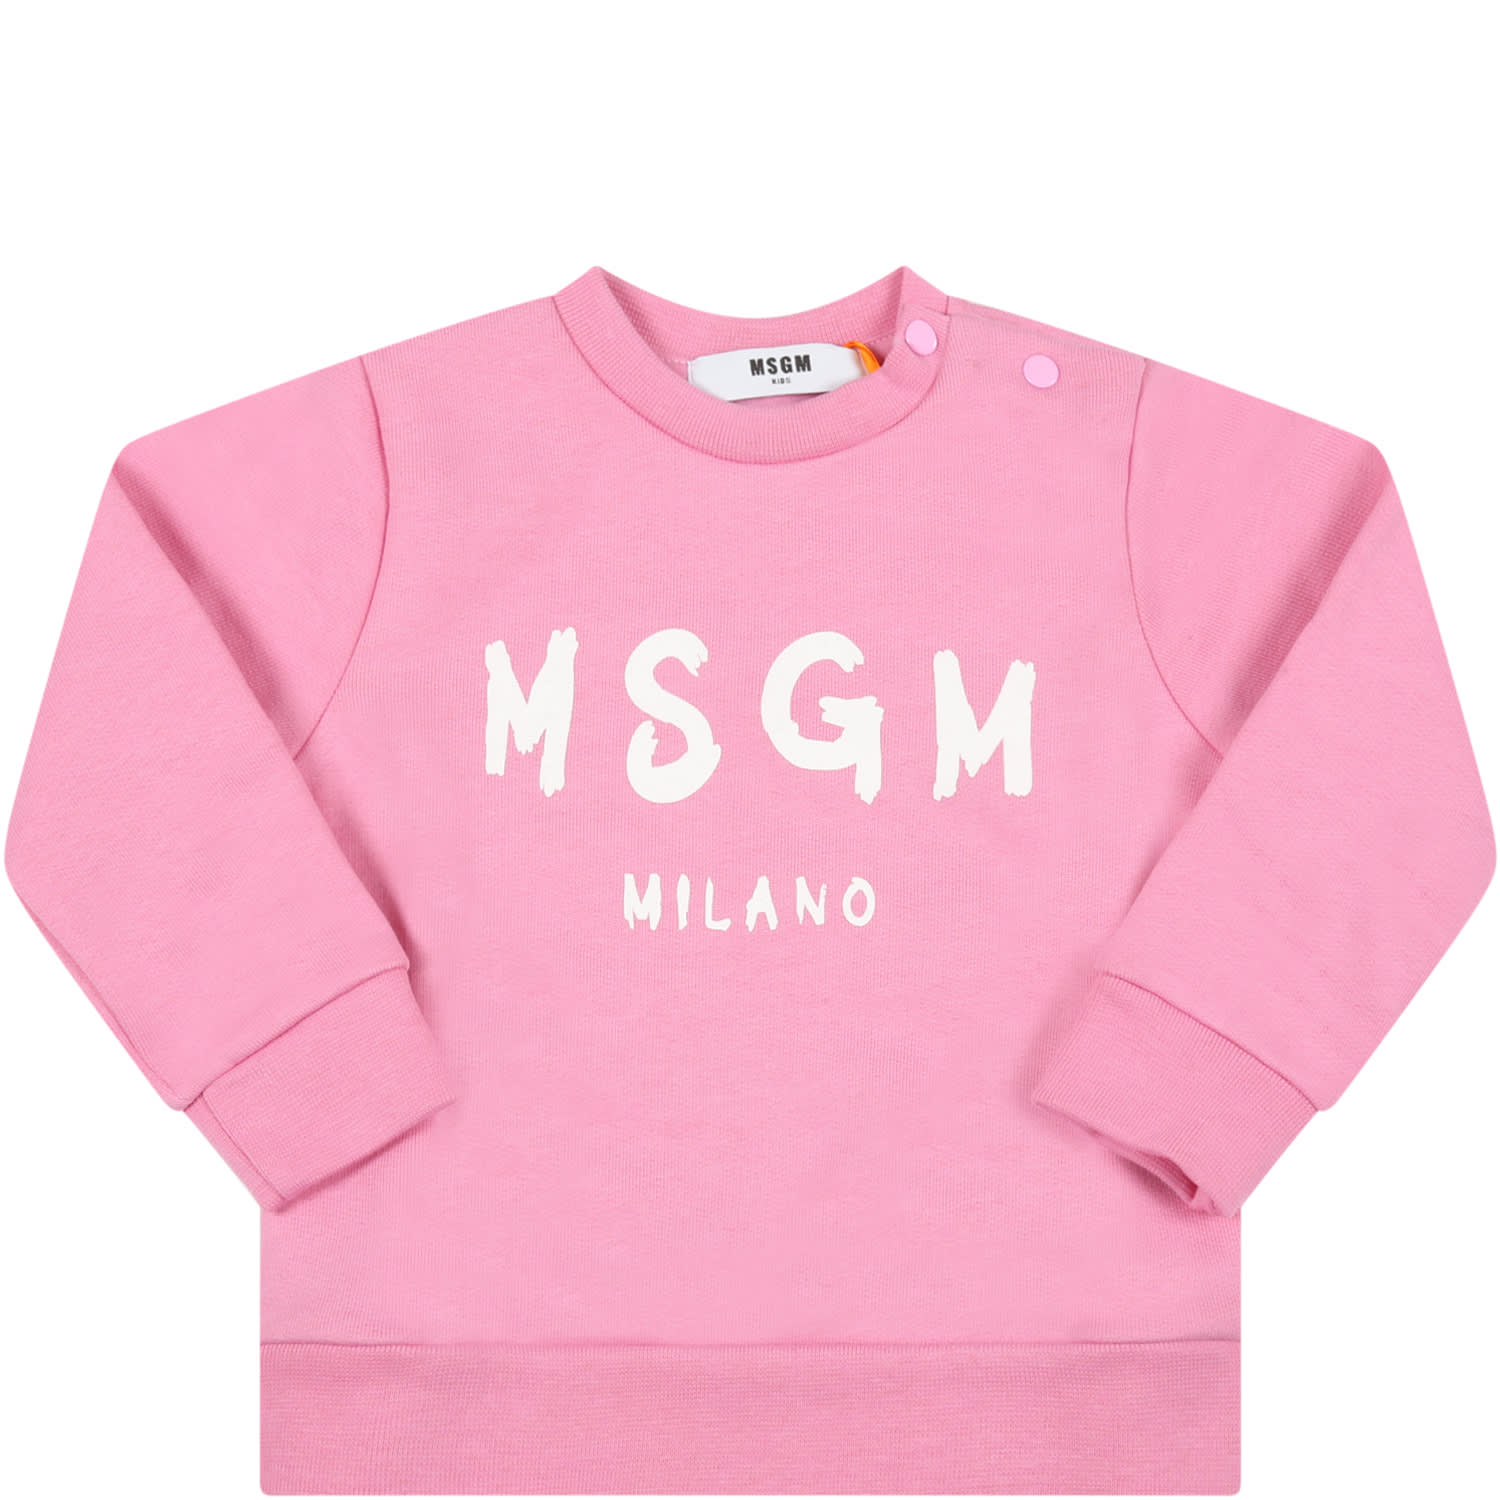 MSGM Pink Sweatshirt For Baby Girl With White Logo